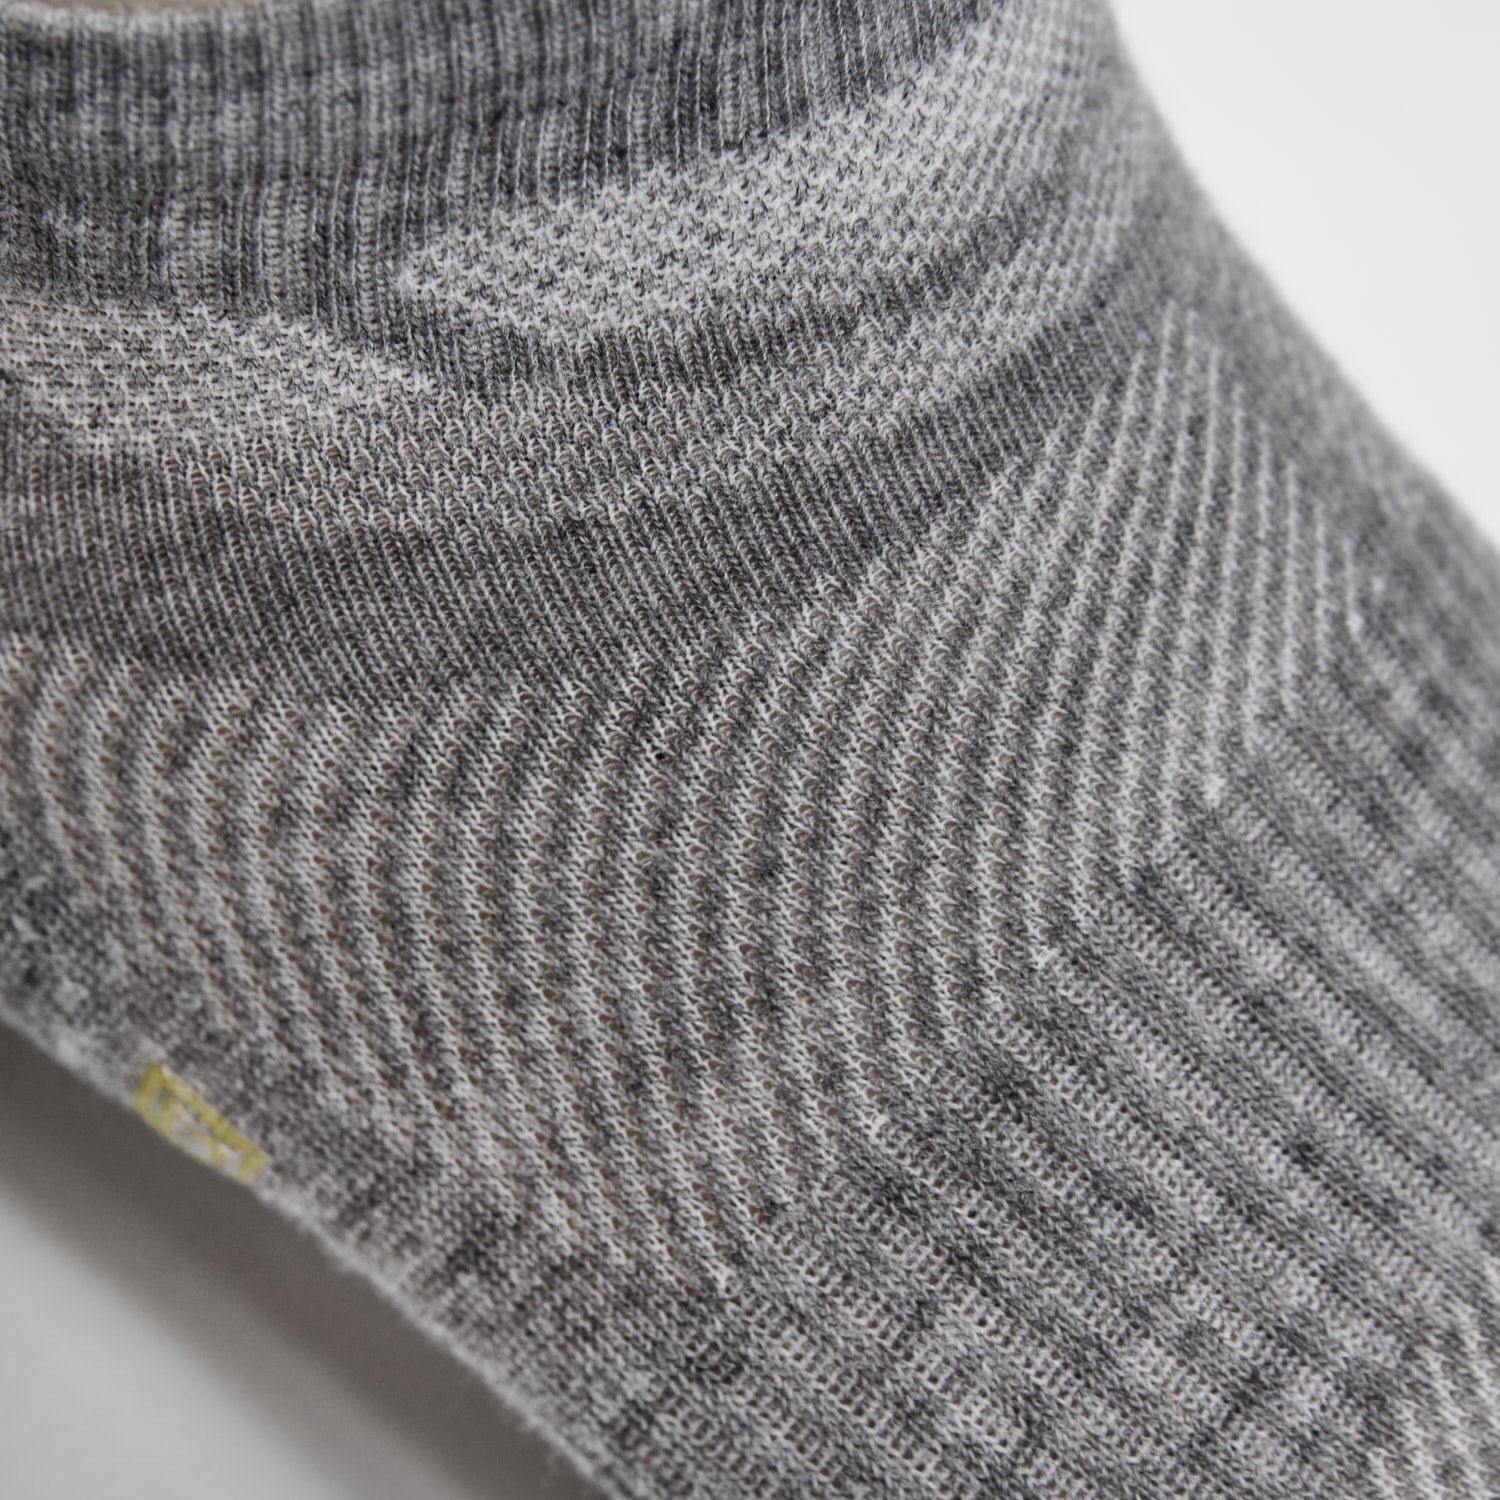 Heather Gray Ankle Sock 12-Pack